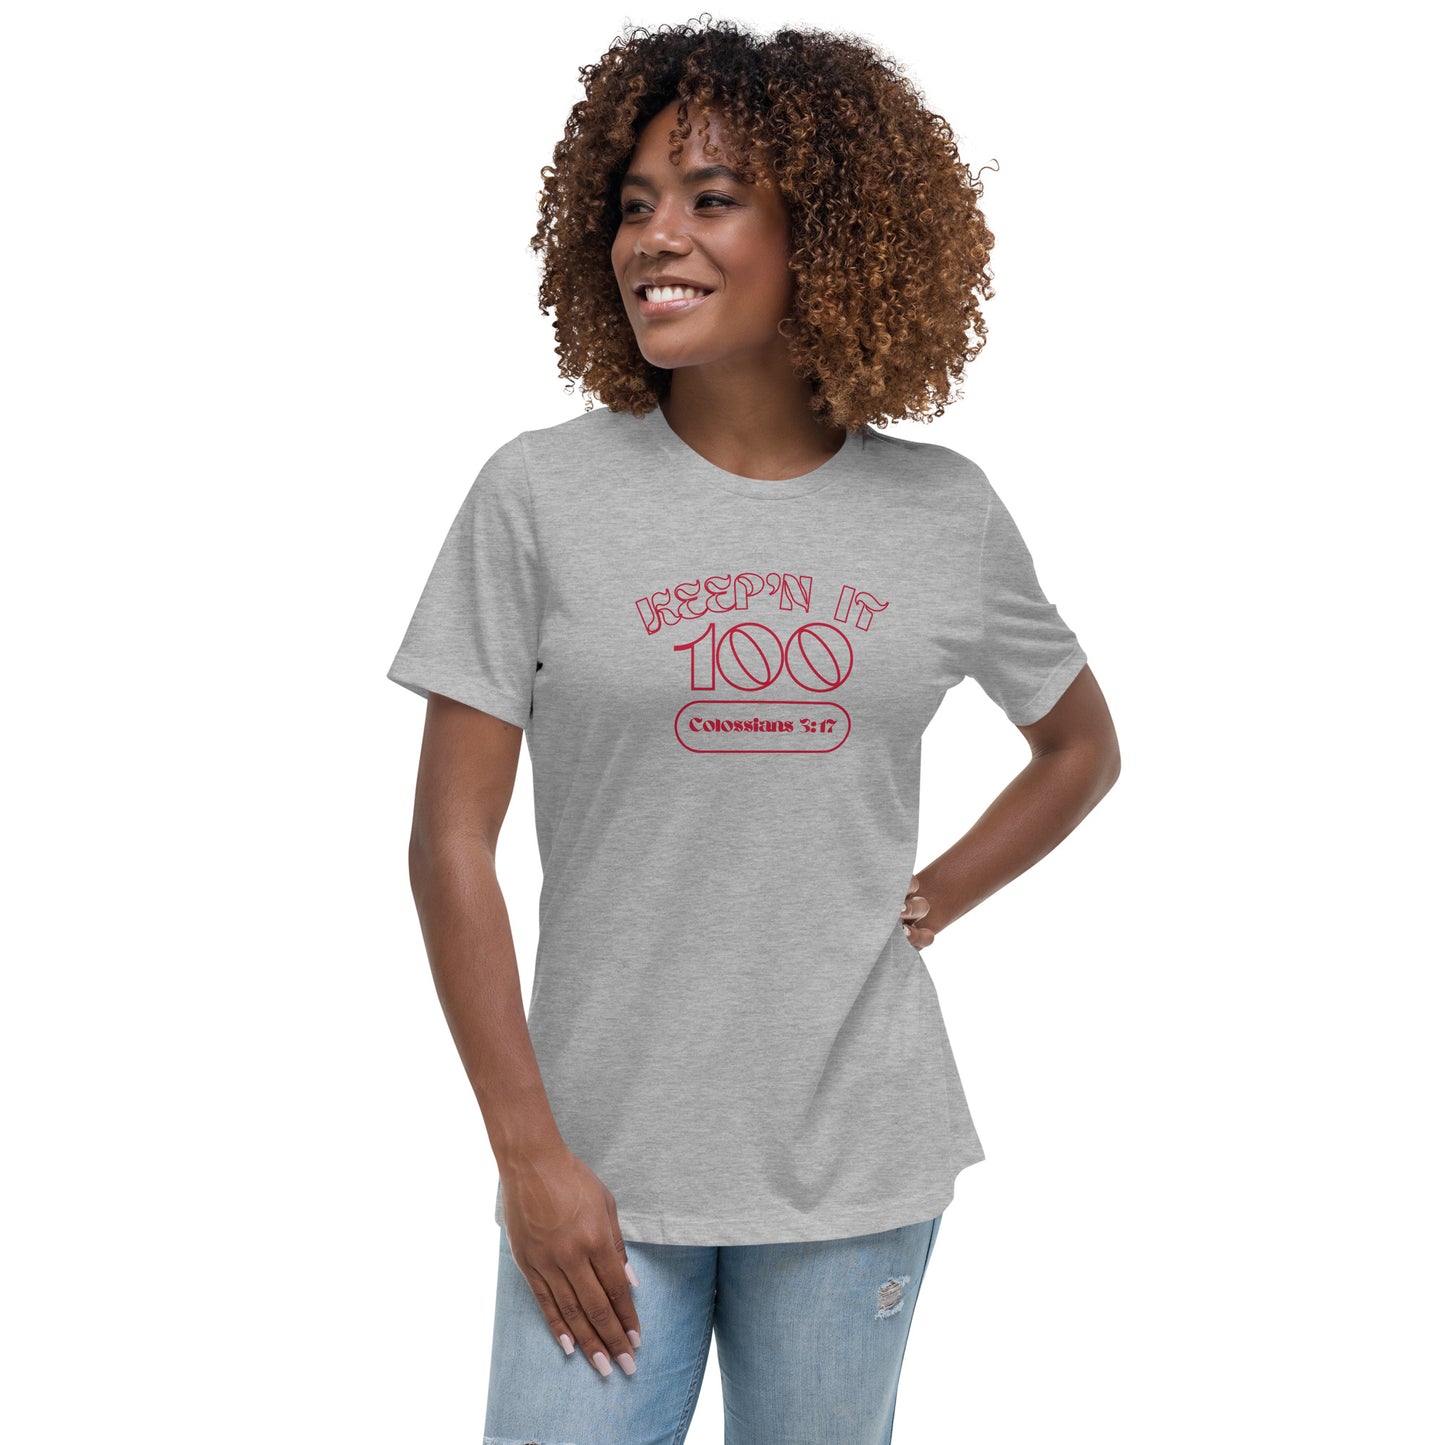 KEEP'N IT 100 Colossians 3:17 Women's Relaxed T-Shirt